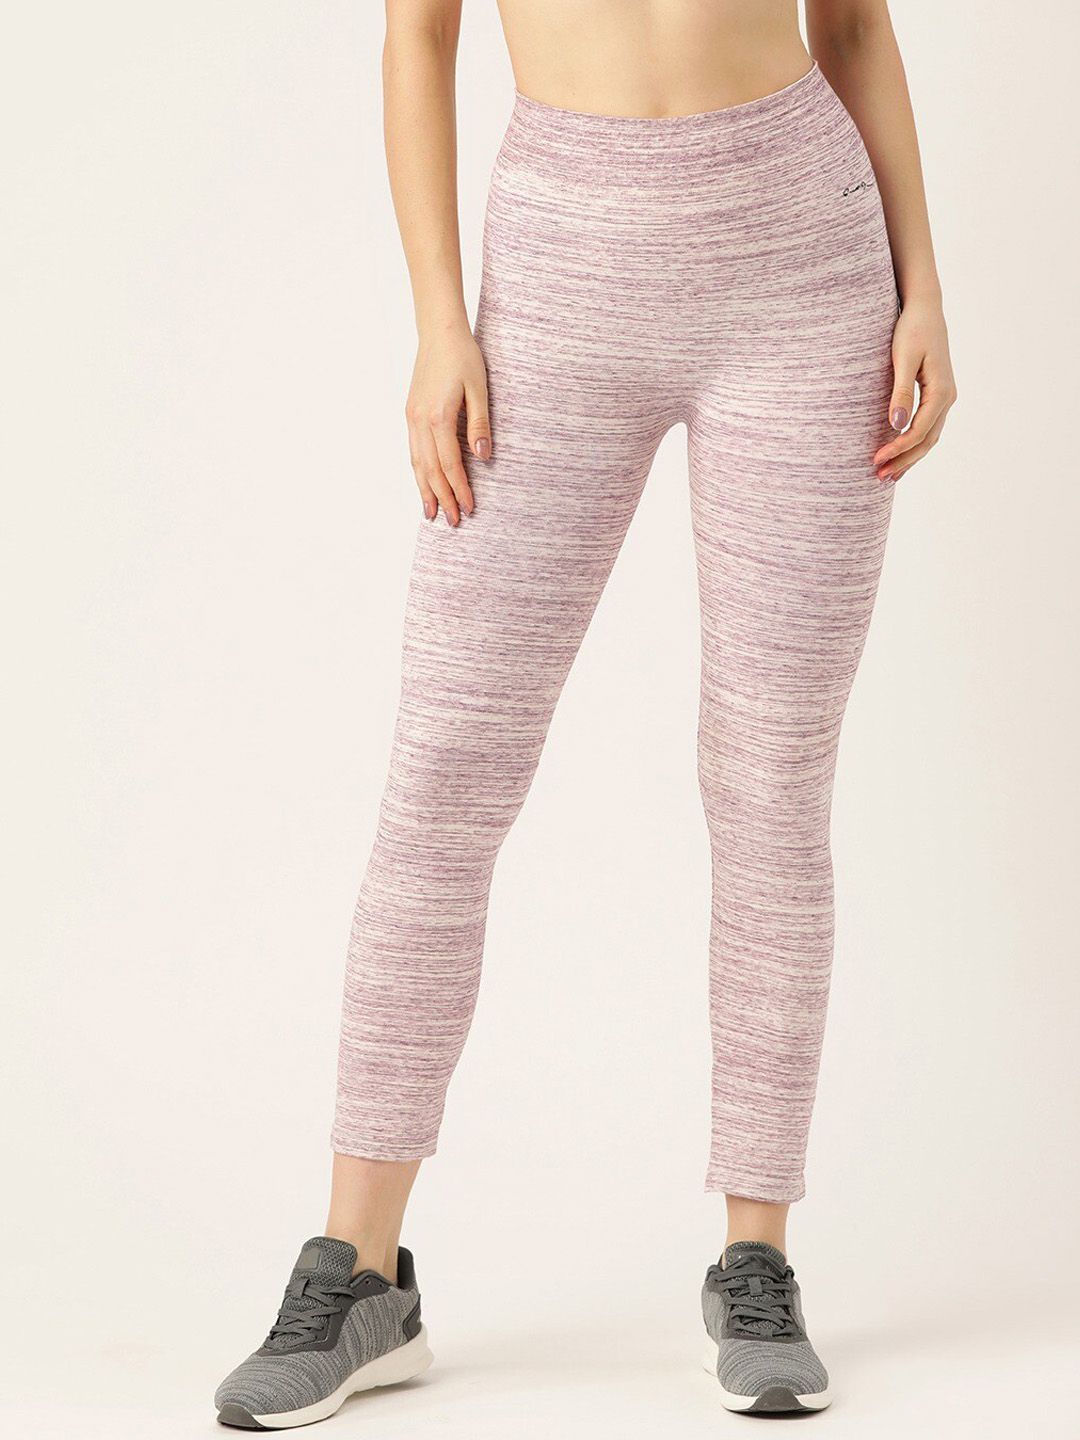 Sweet Dreams Women Lavender Striped Sports Tights Price in India